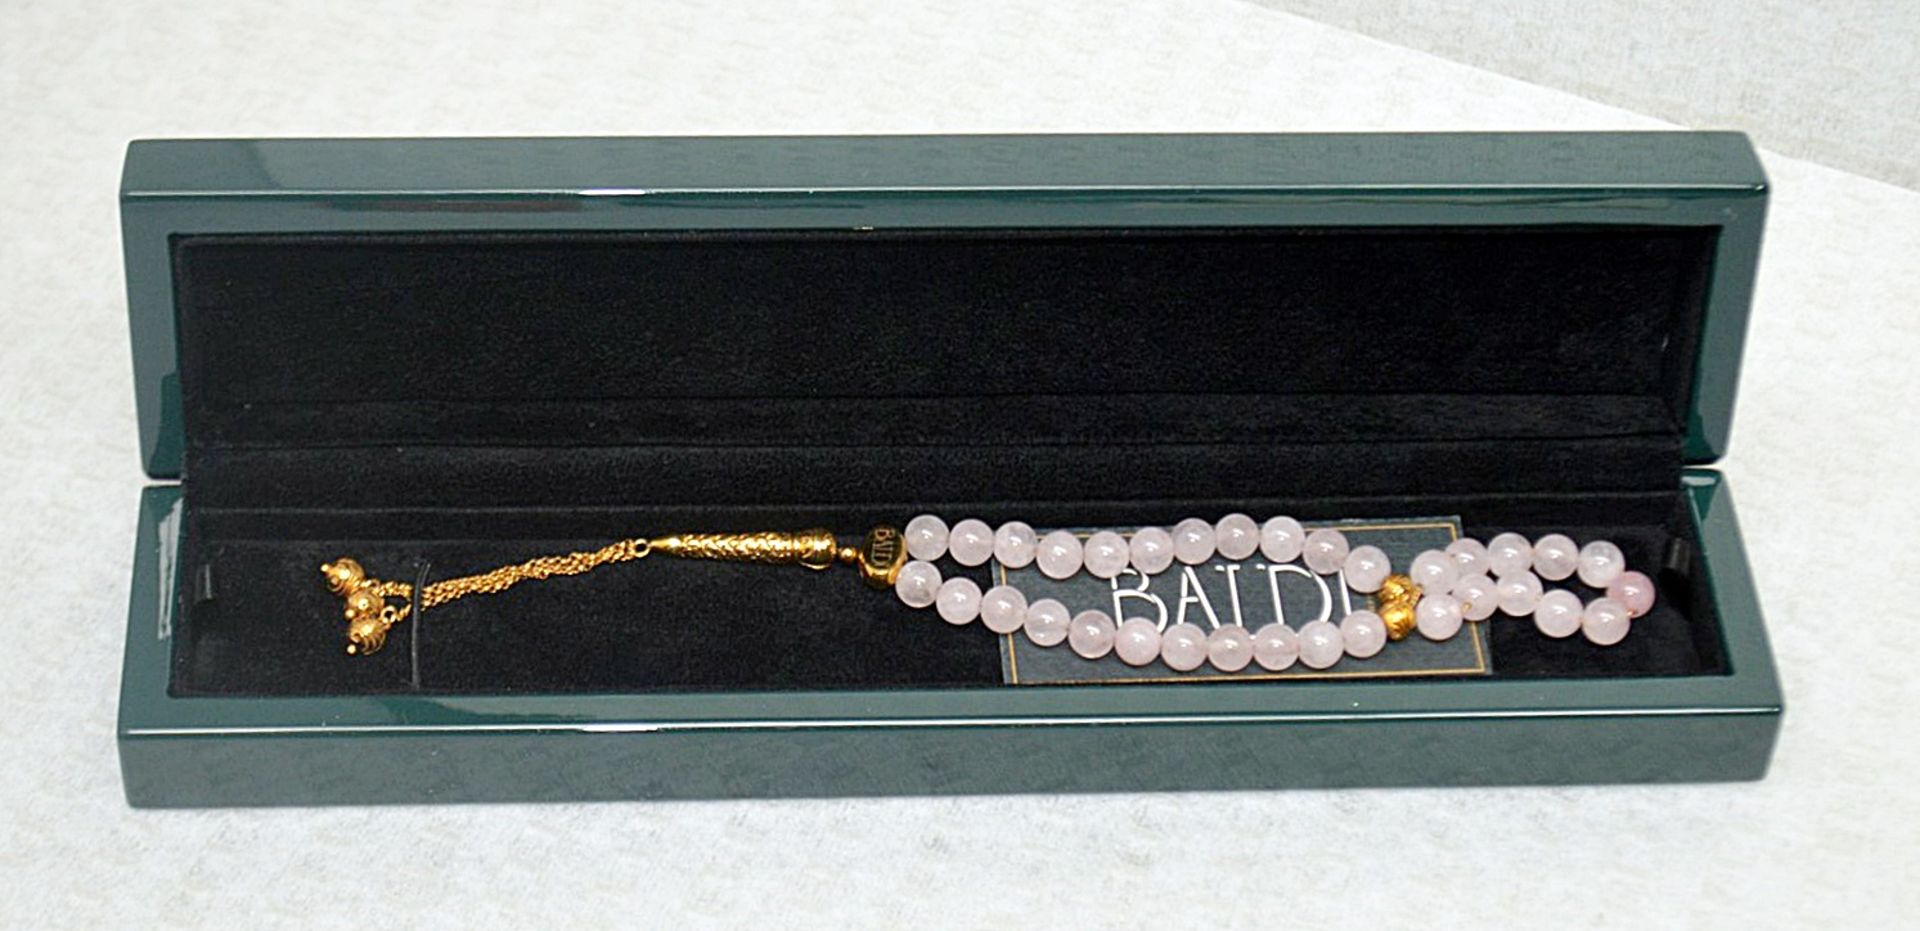 1 x BALDI 'Home Jewels' Italian Hand-crafted Artisan MISBAHA Prayer Beads In Pink Quartz And Gold